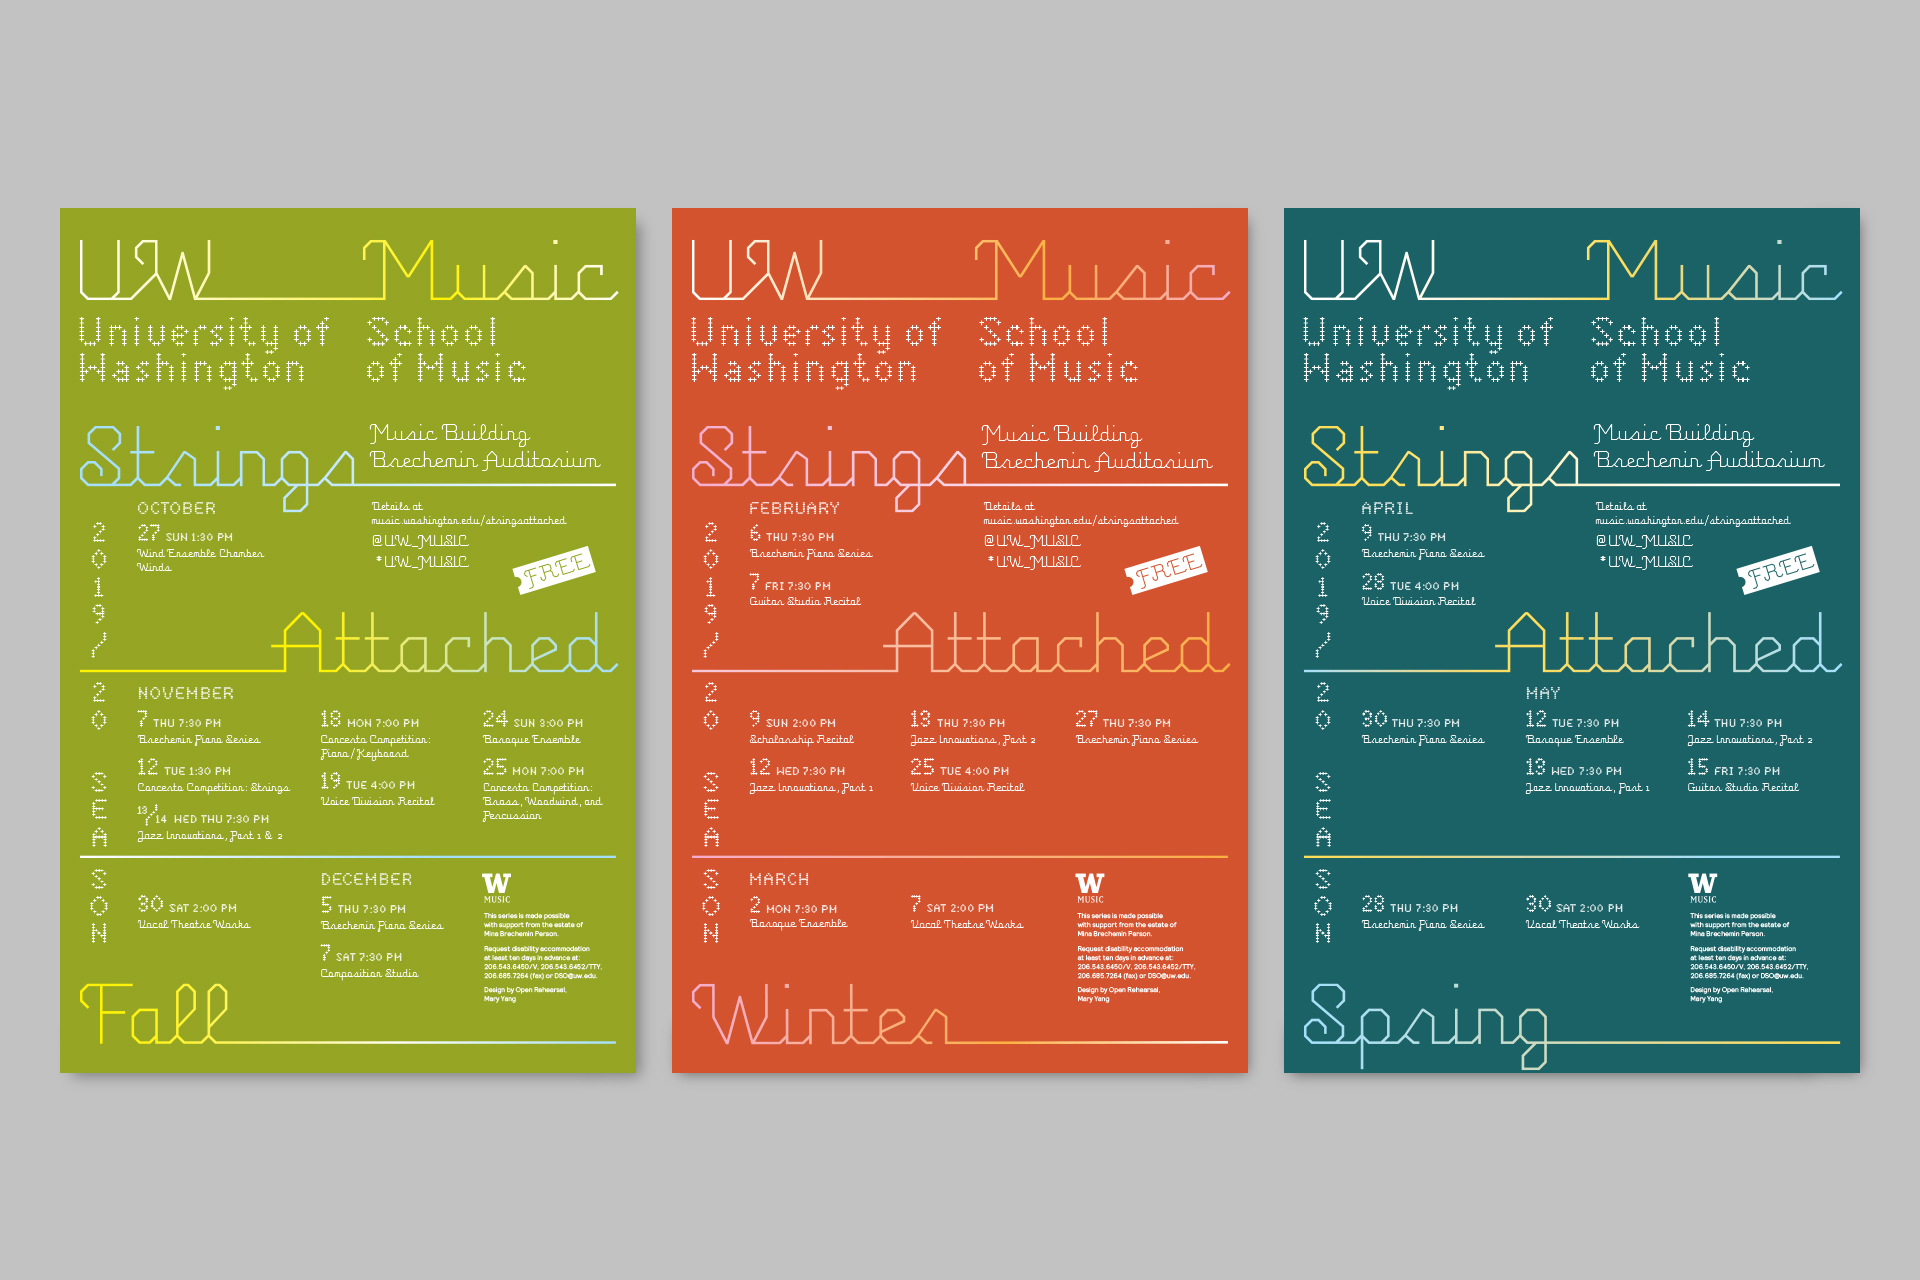 Poster color palette inspired by doors in the Music Building basement